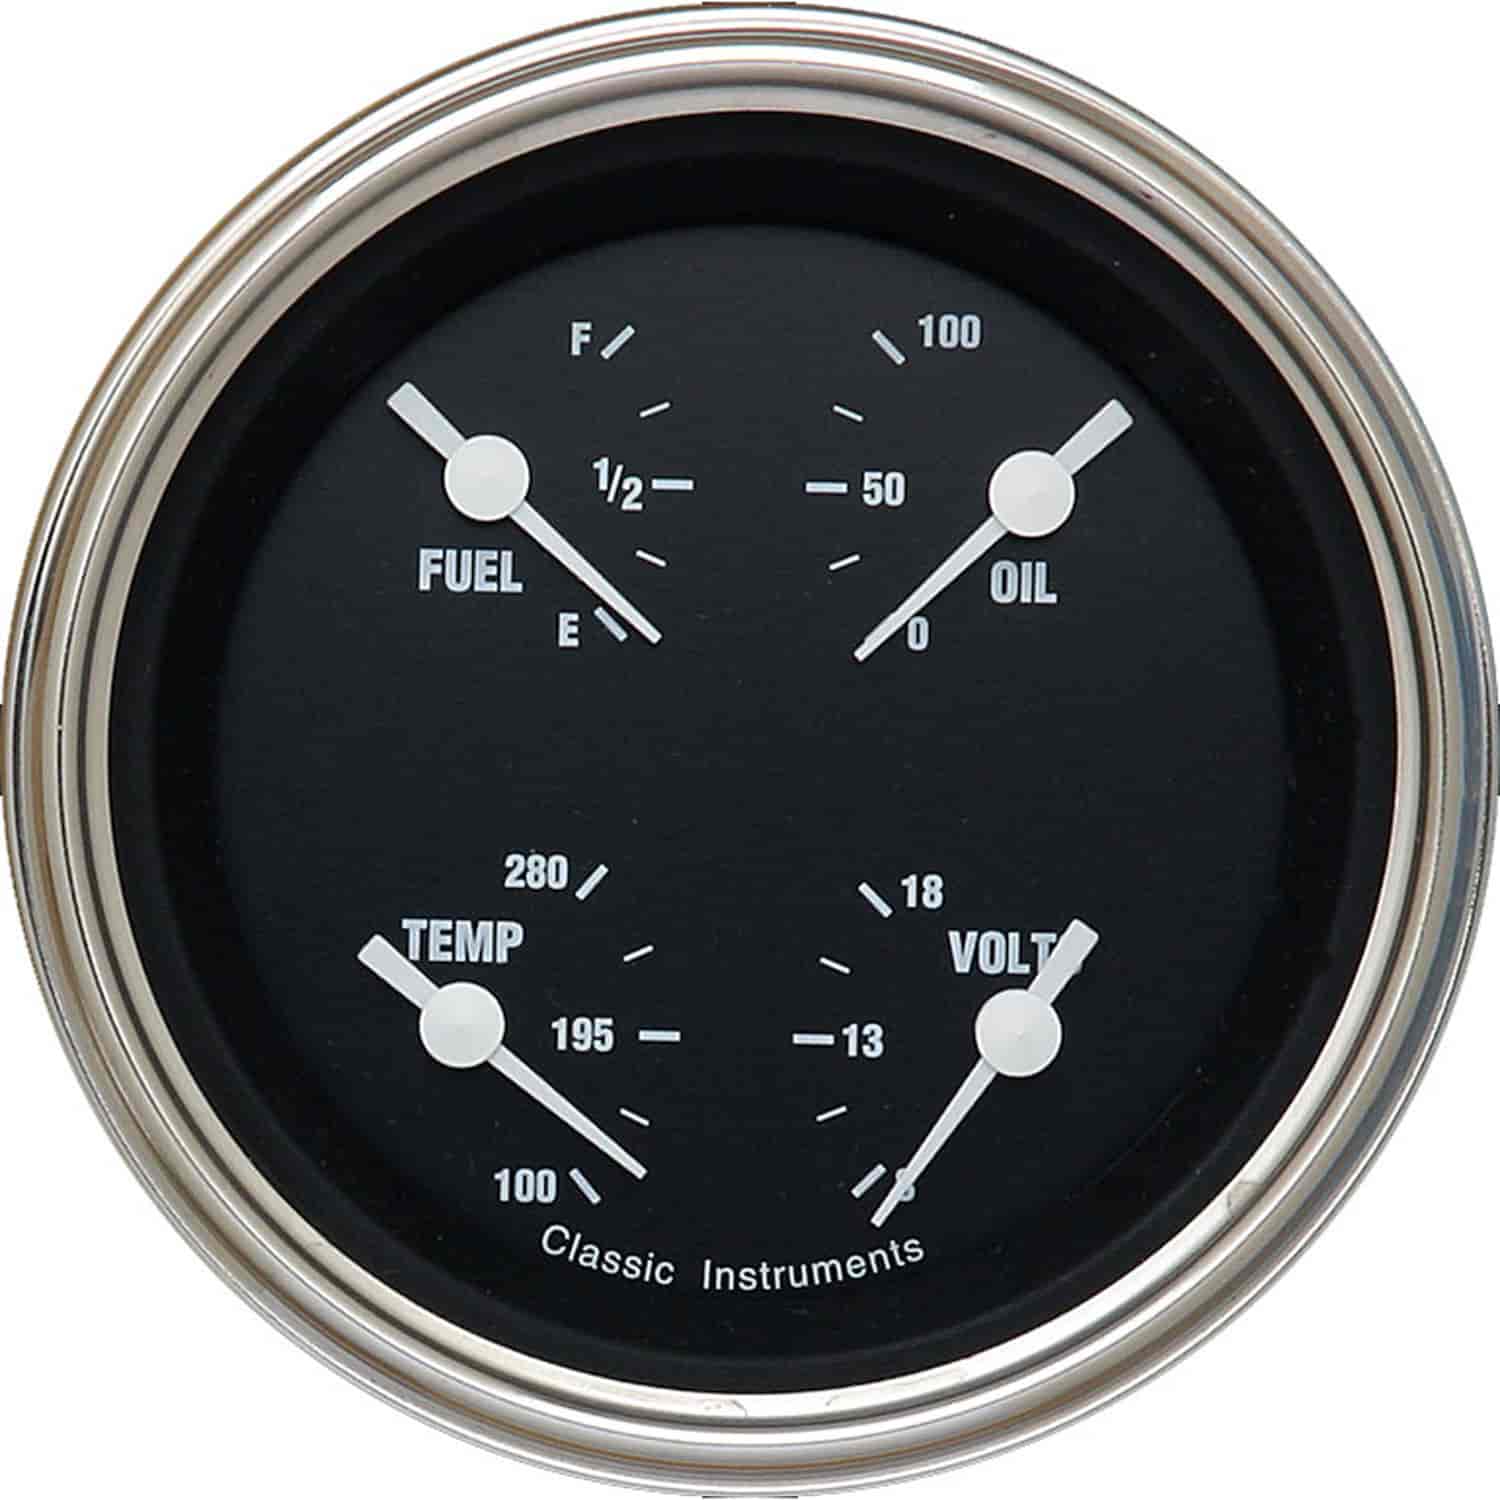 Hot Rod Series Quad Gauge 3-3/8" Electrical Includes: